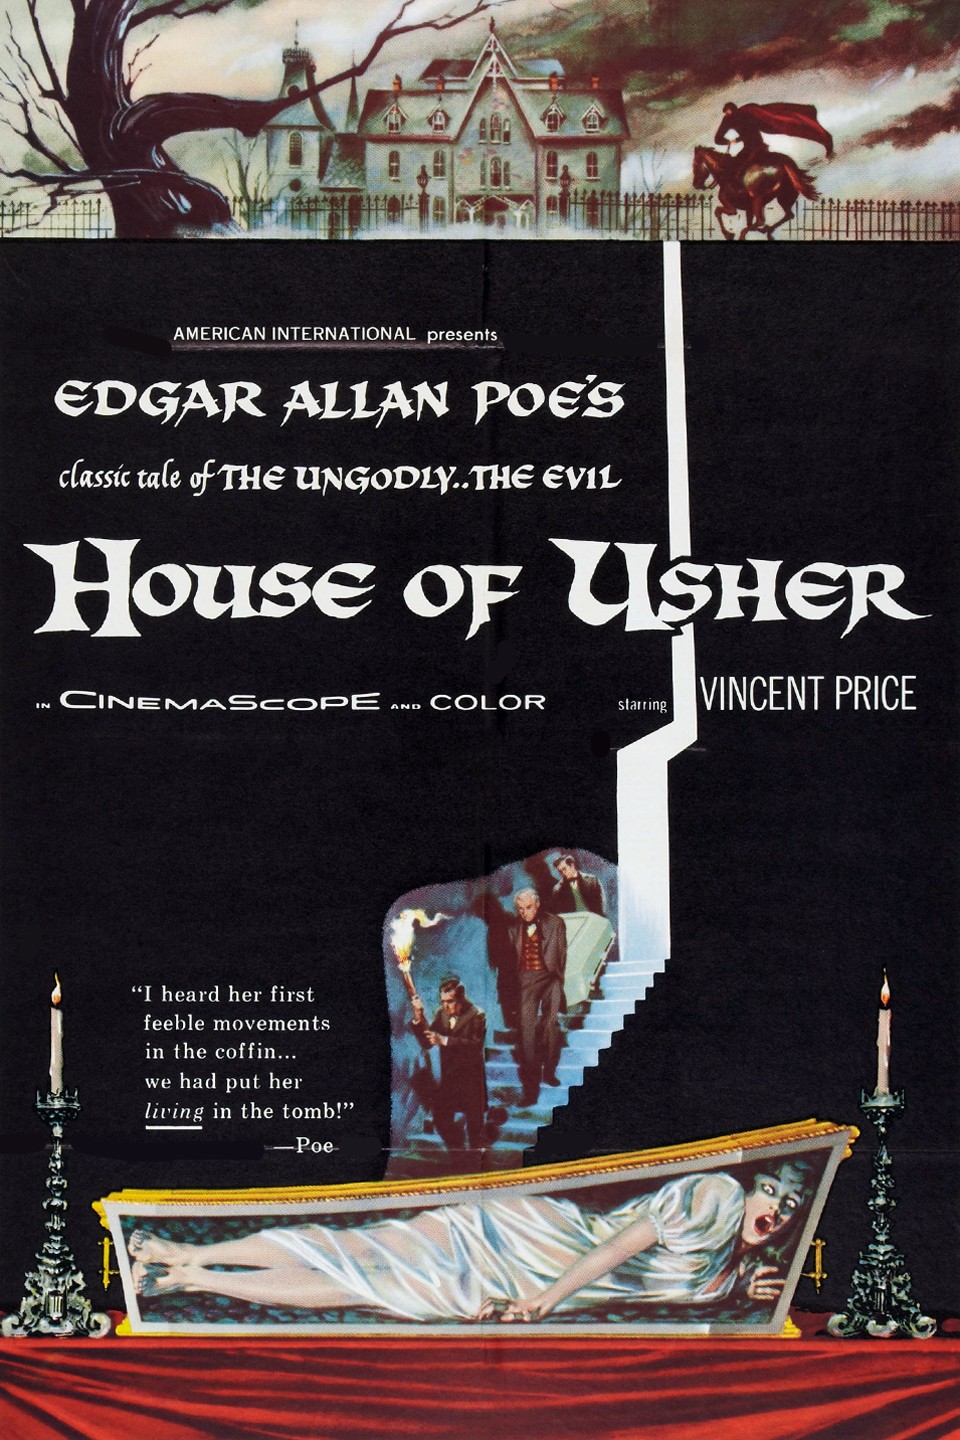 The Fall of the House of Usher - Full Cast & Crew - TV Guide